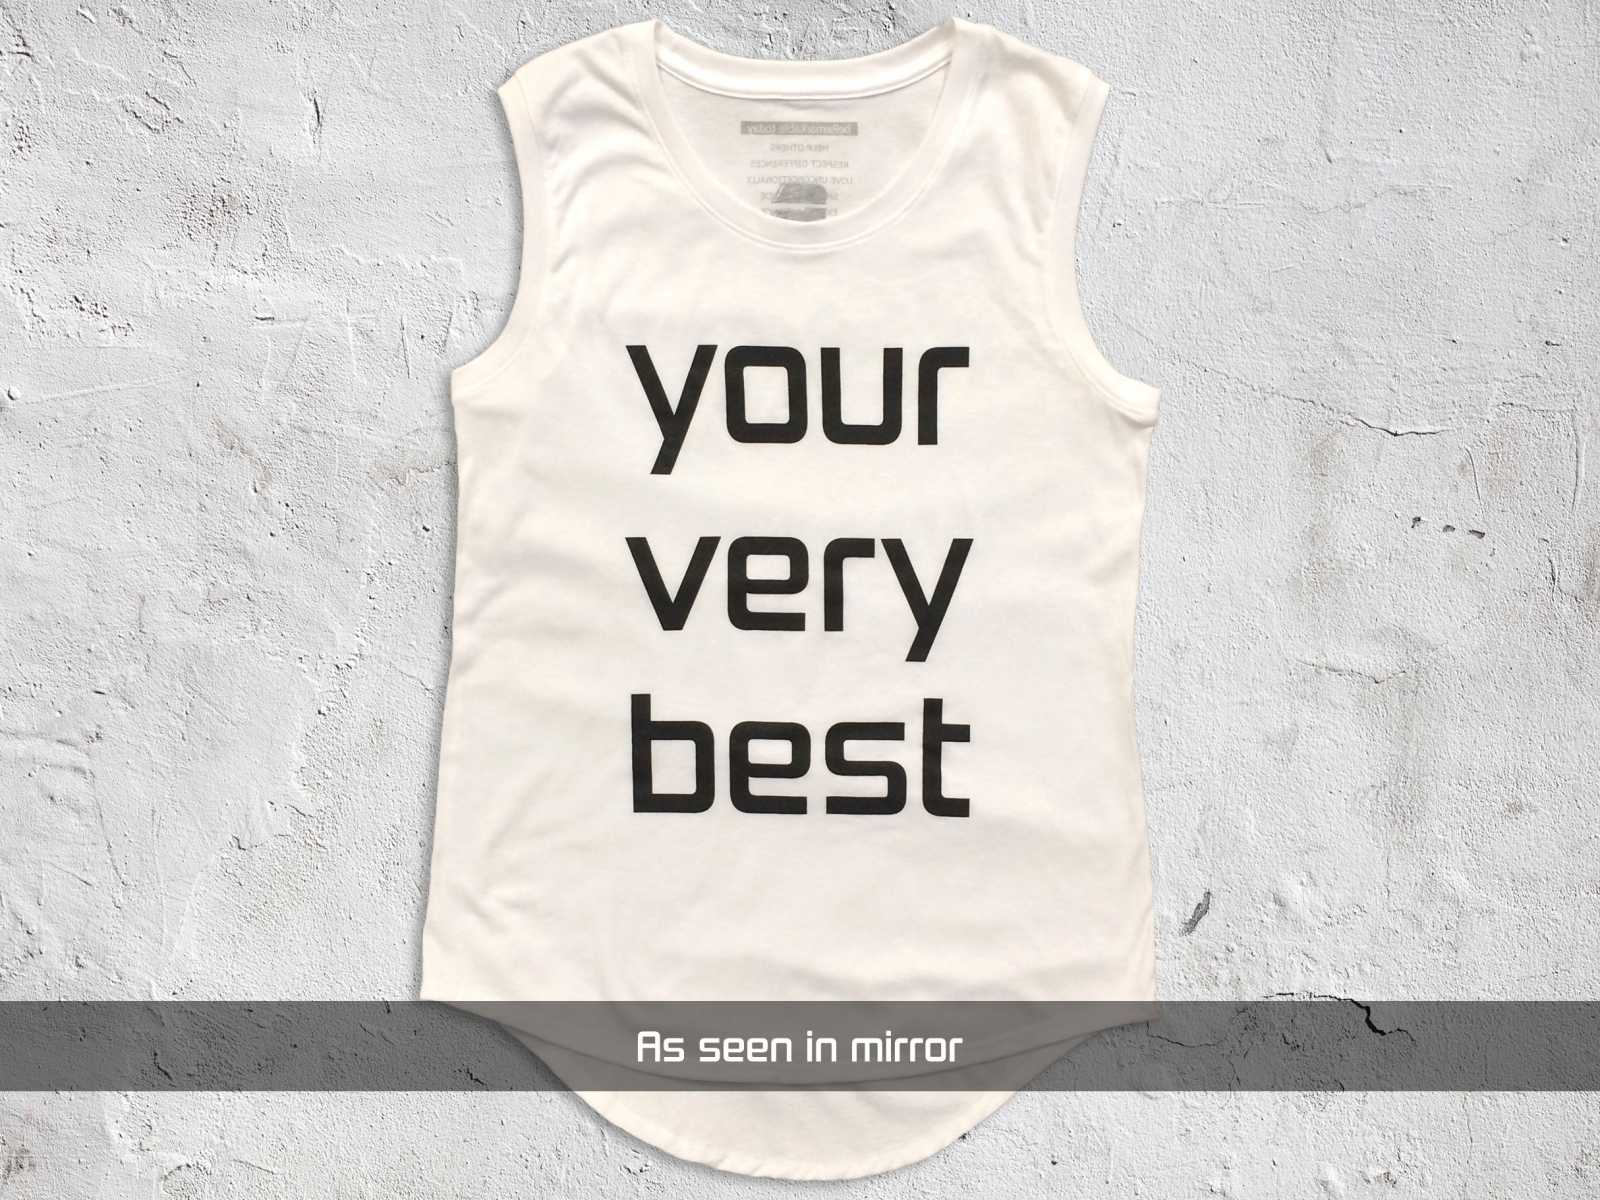 Your Very Best – Women’s White Sleeveless T-shirt (as seen in mirror)